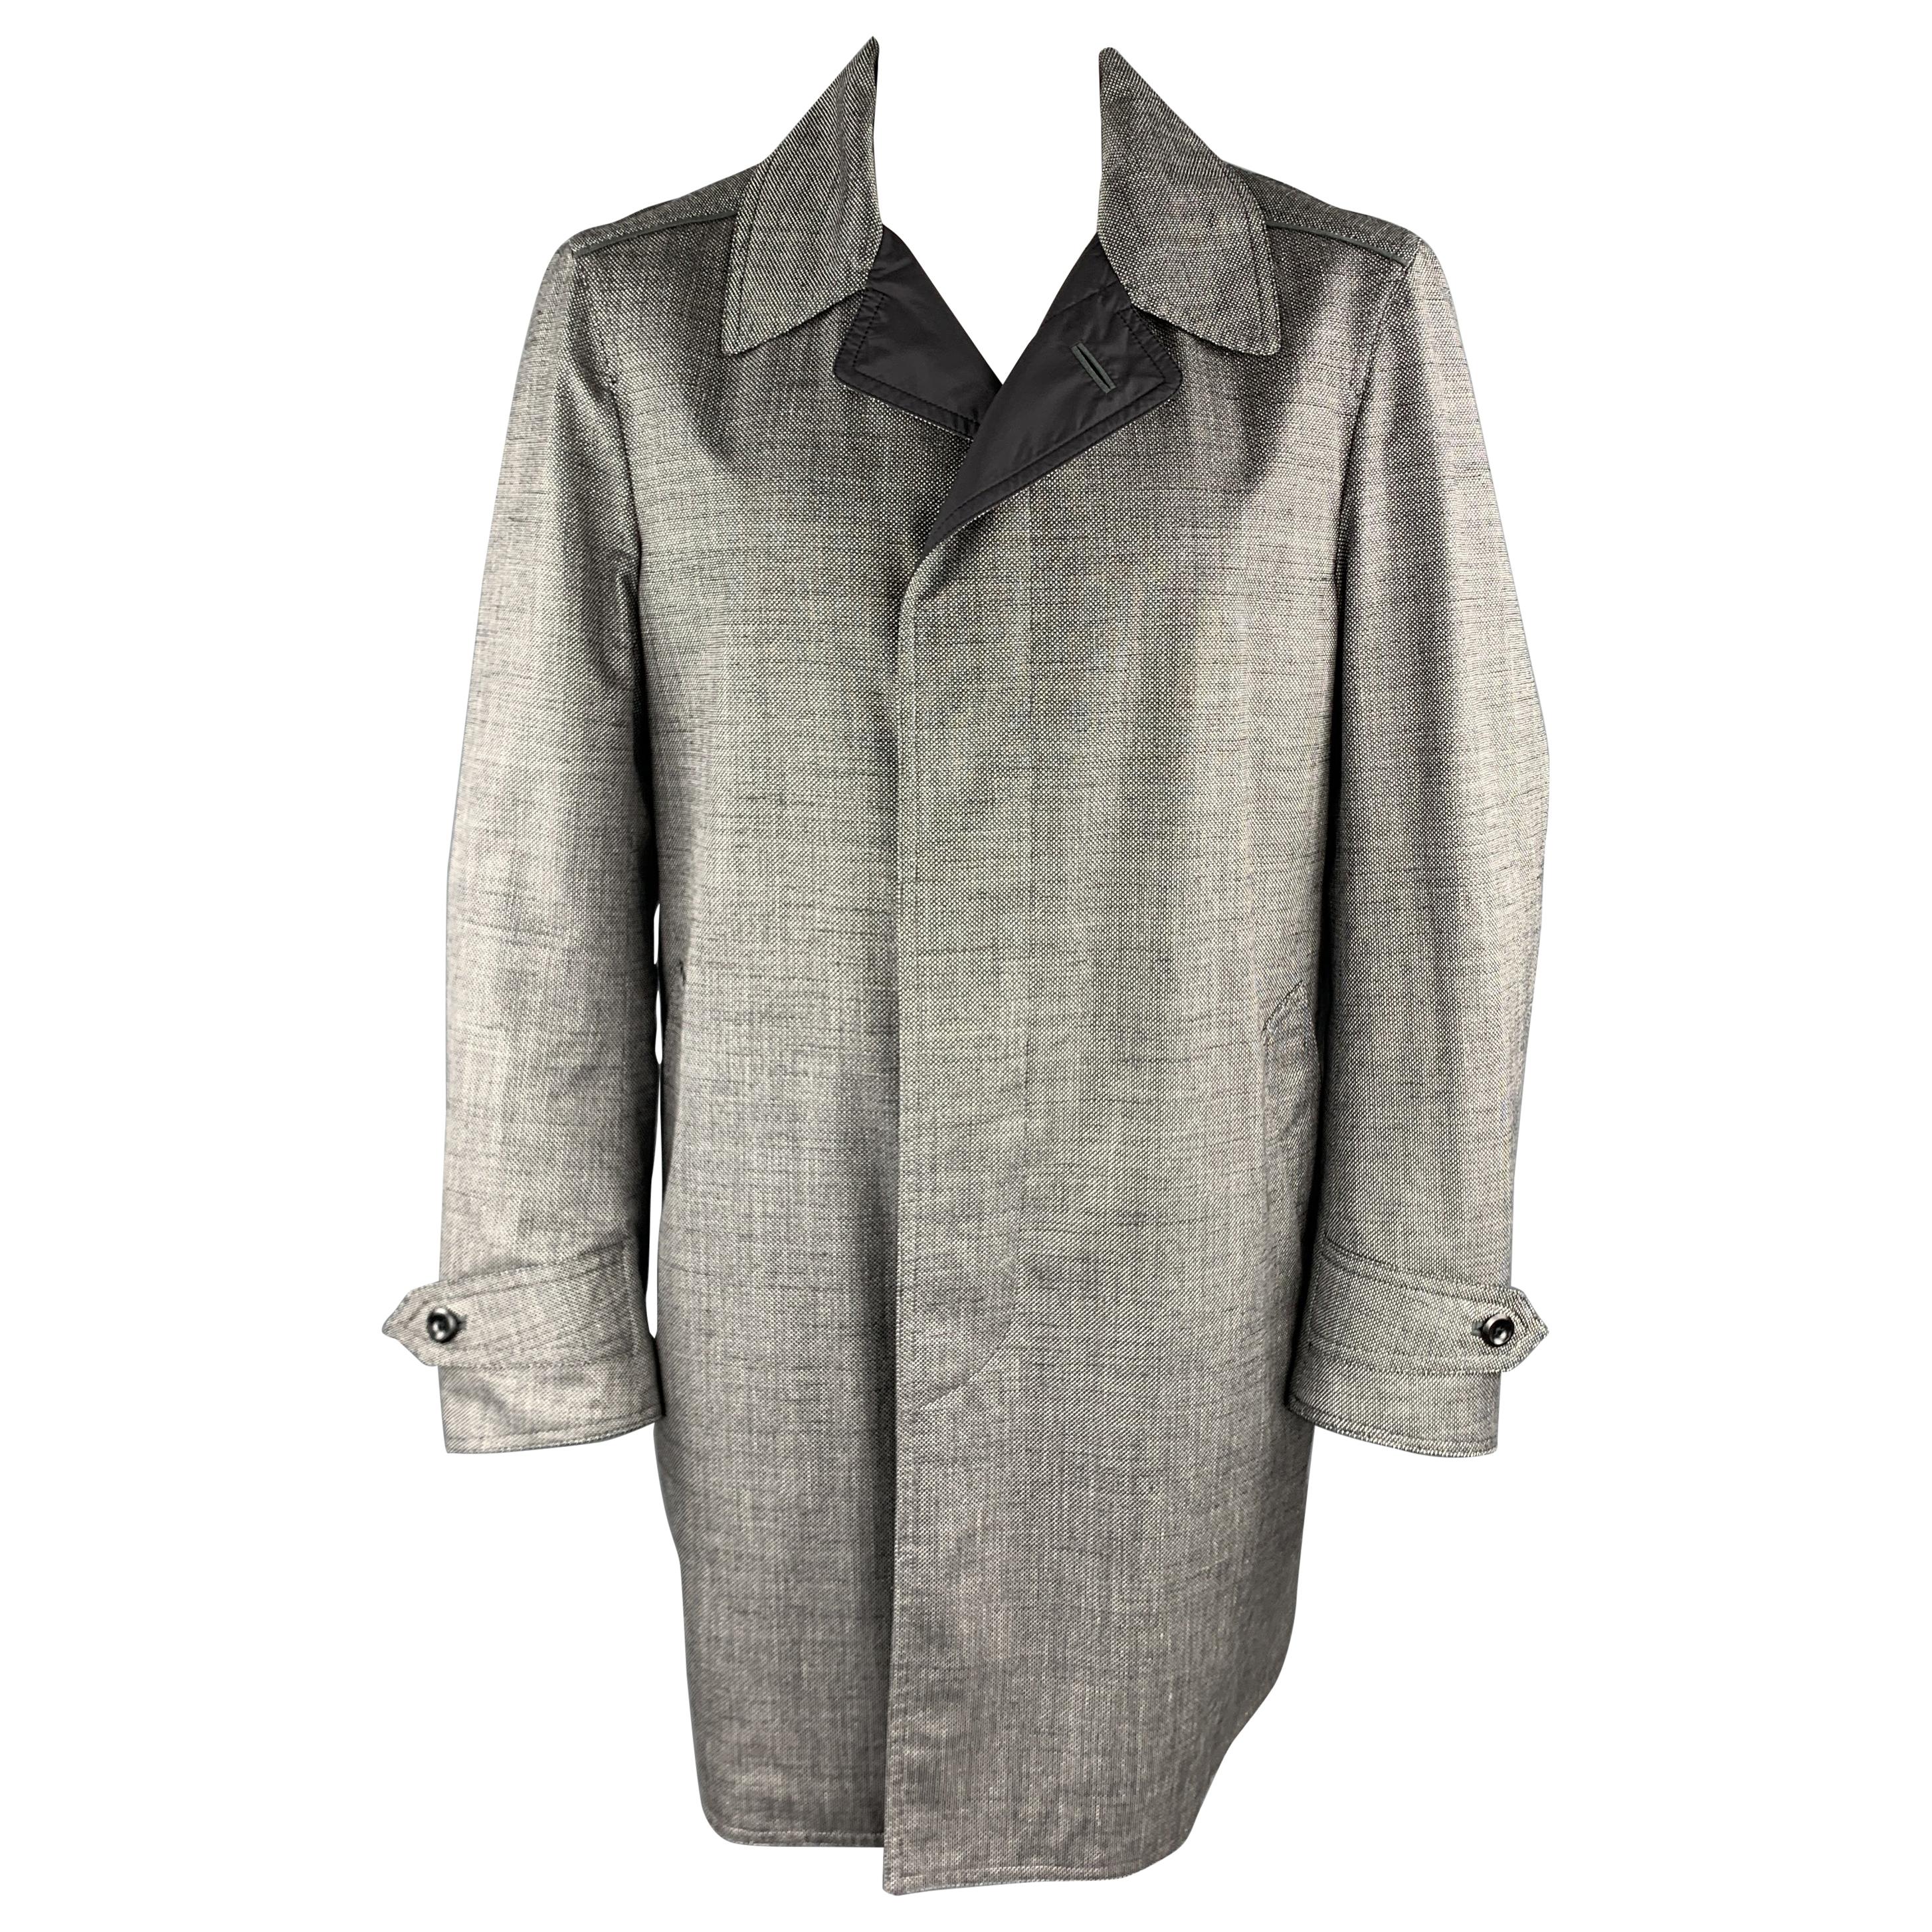 TOM FORD Size 44 Grey Heather Wool Blend Woven Waterproof Reversible Trench Coat